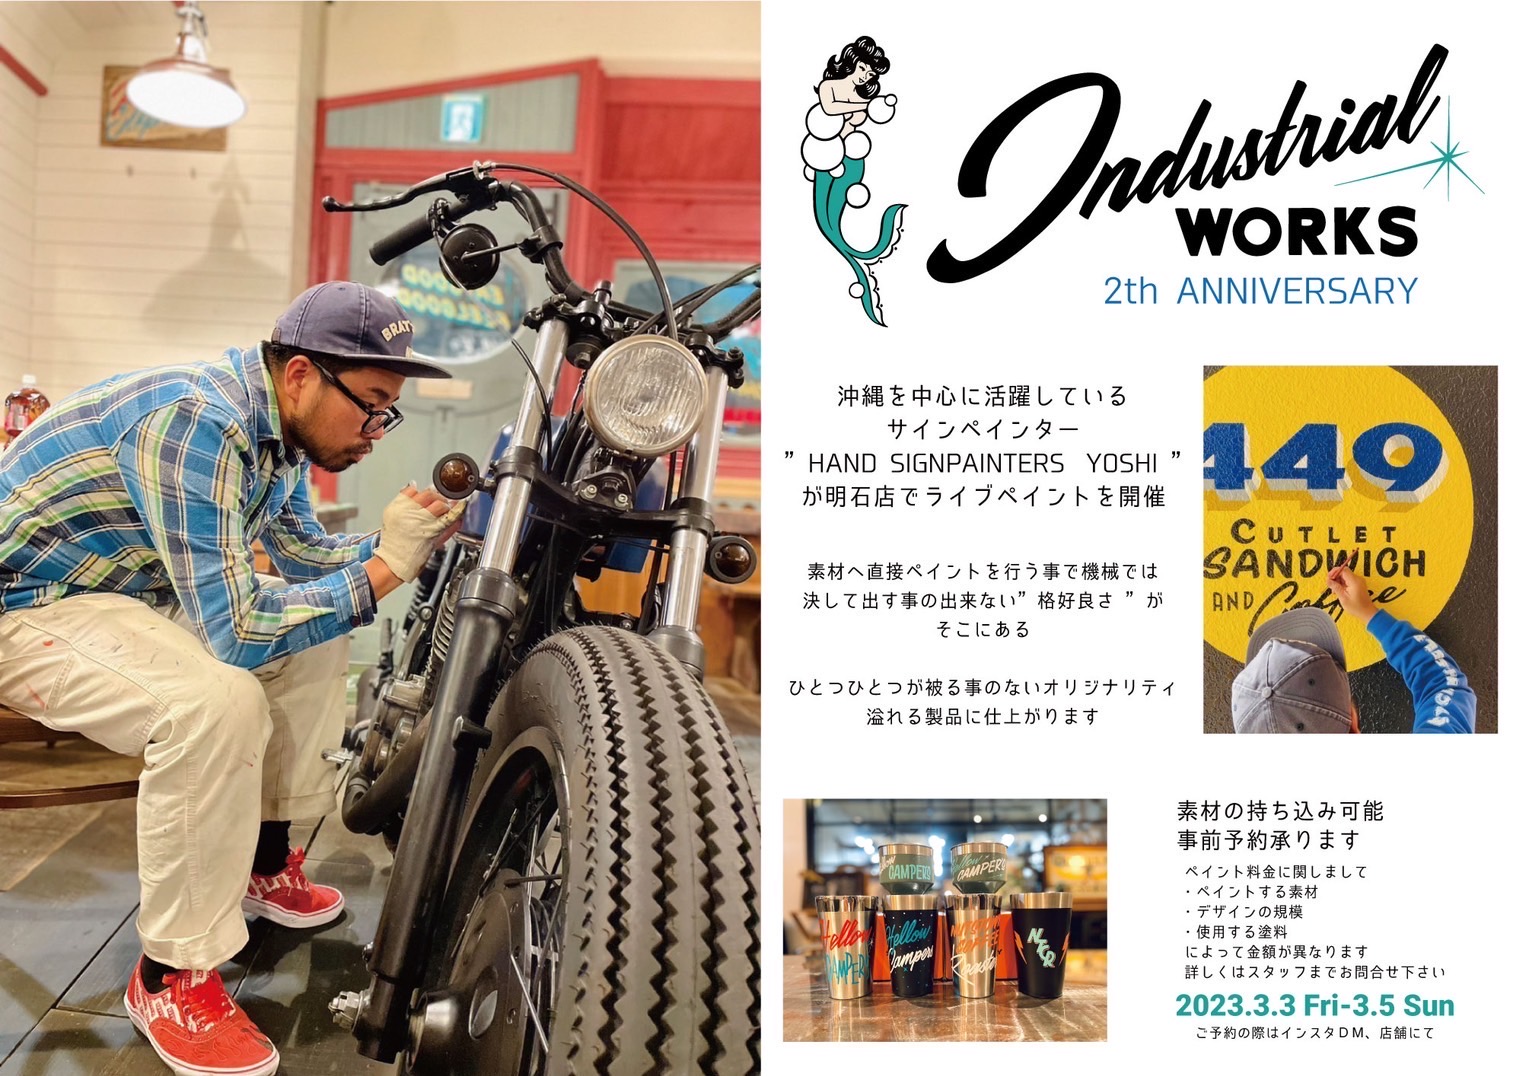 INDUSTRIAL WORKS HYOGO "2nd anniversary" EVENT